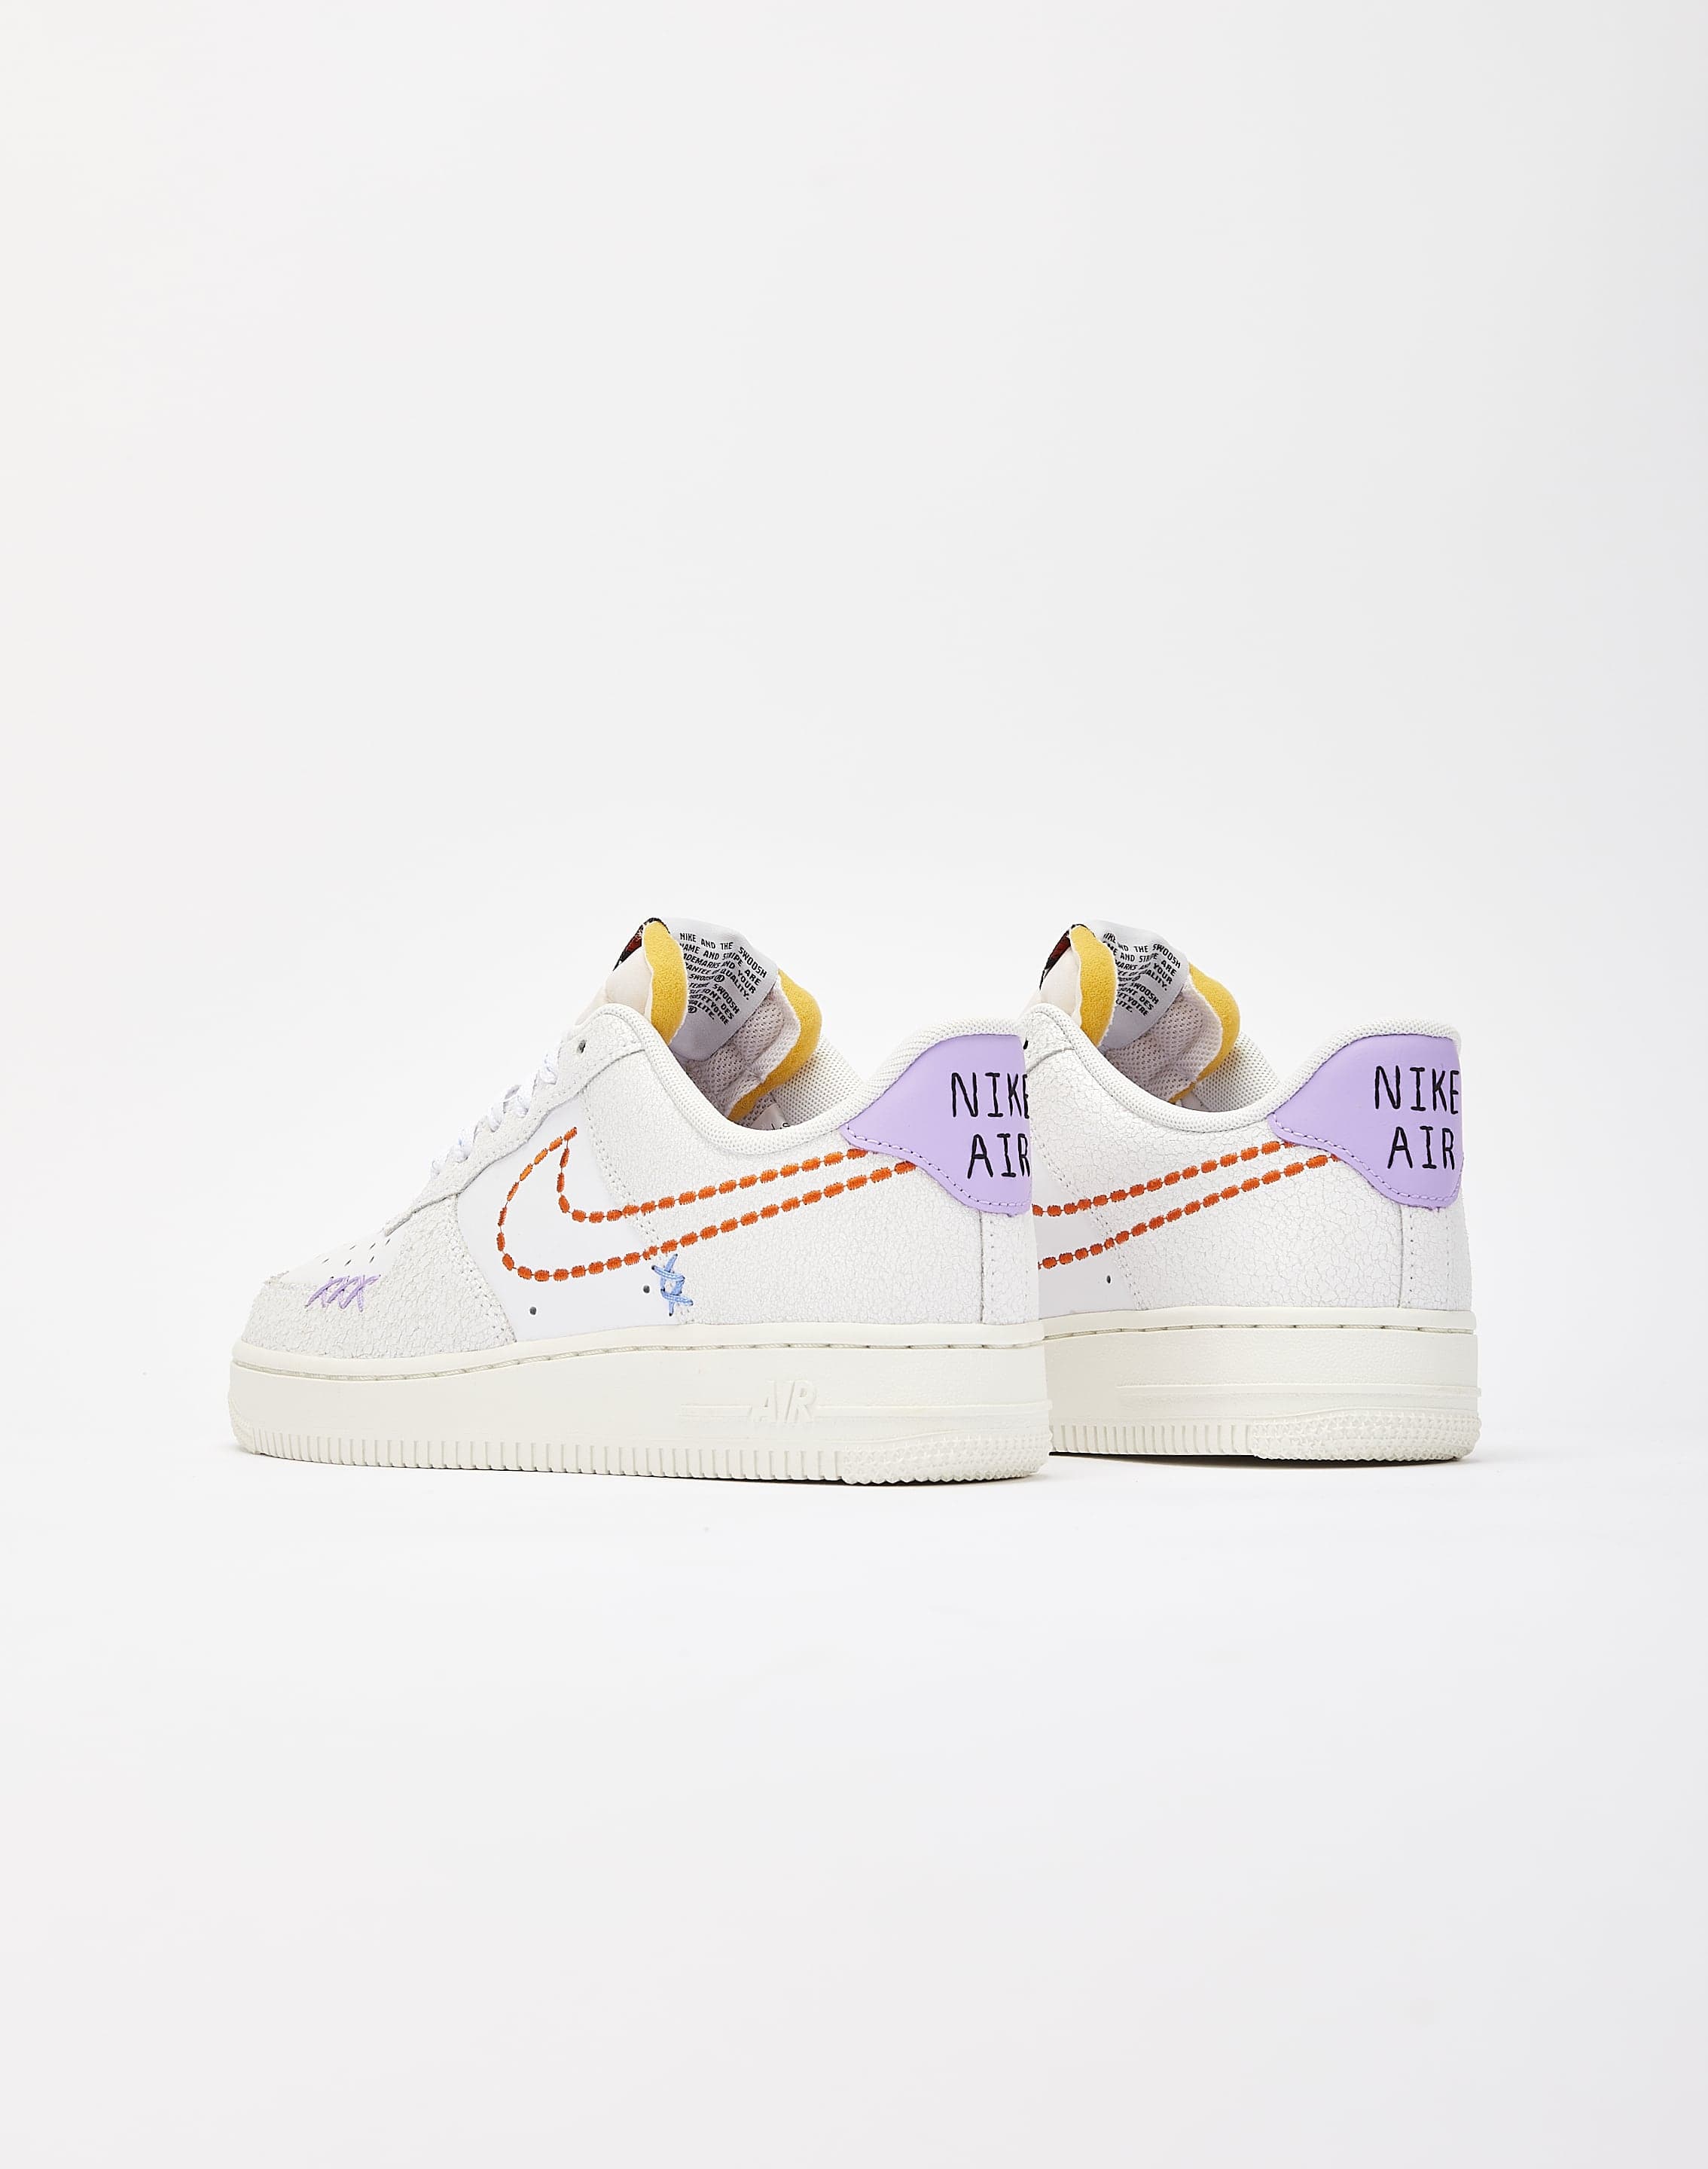 Nike AIR FORCE 1 '07 LV8 UTILITY – DTLR